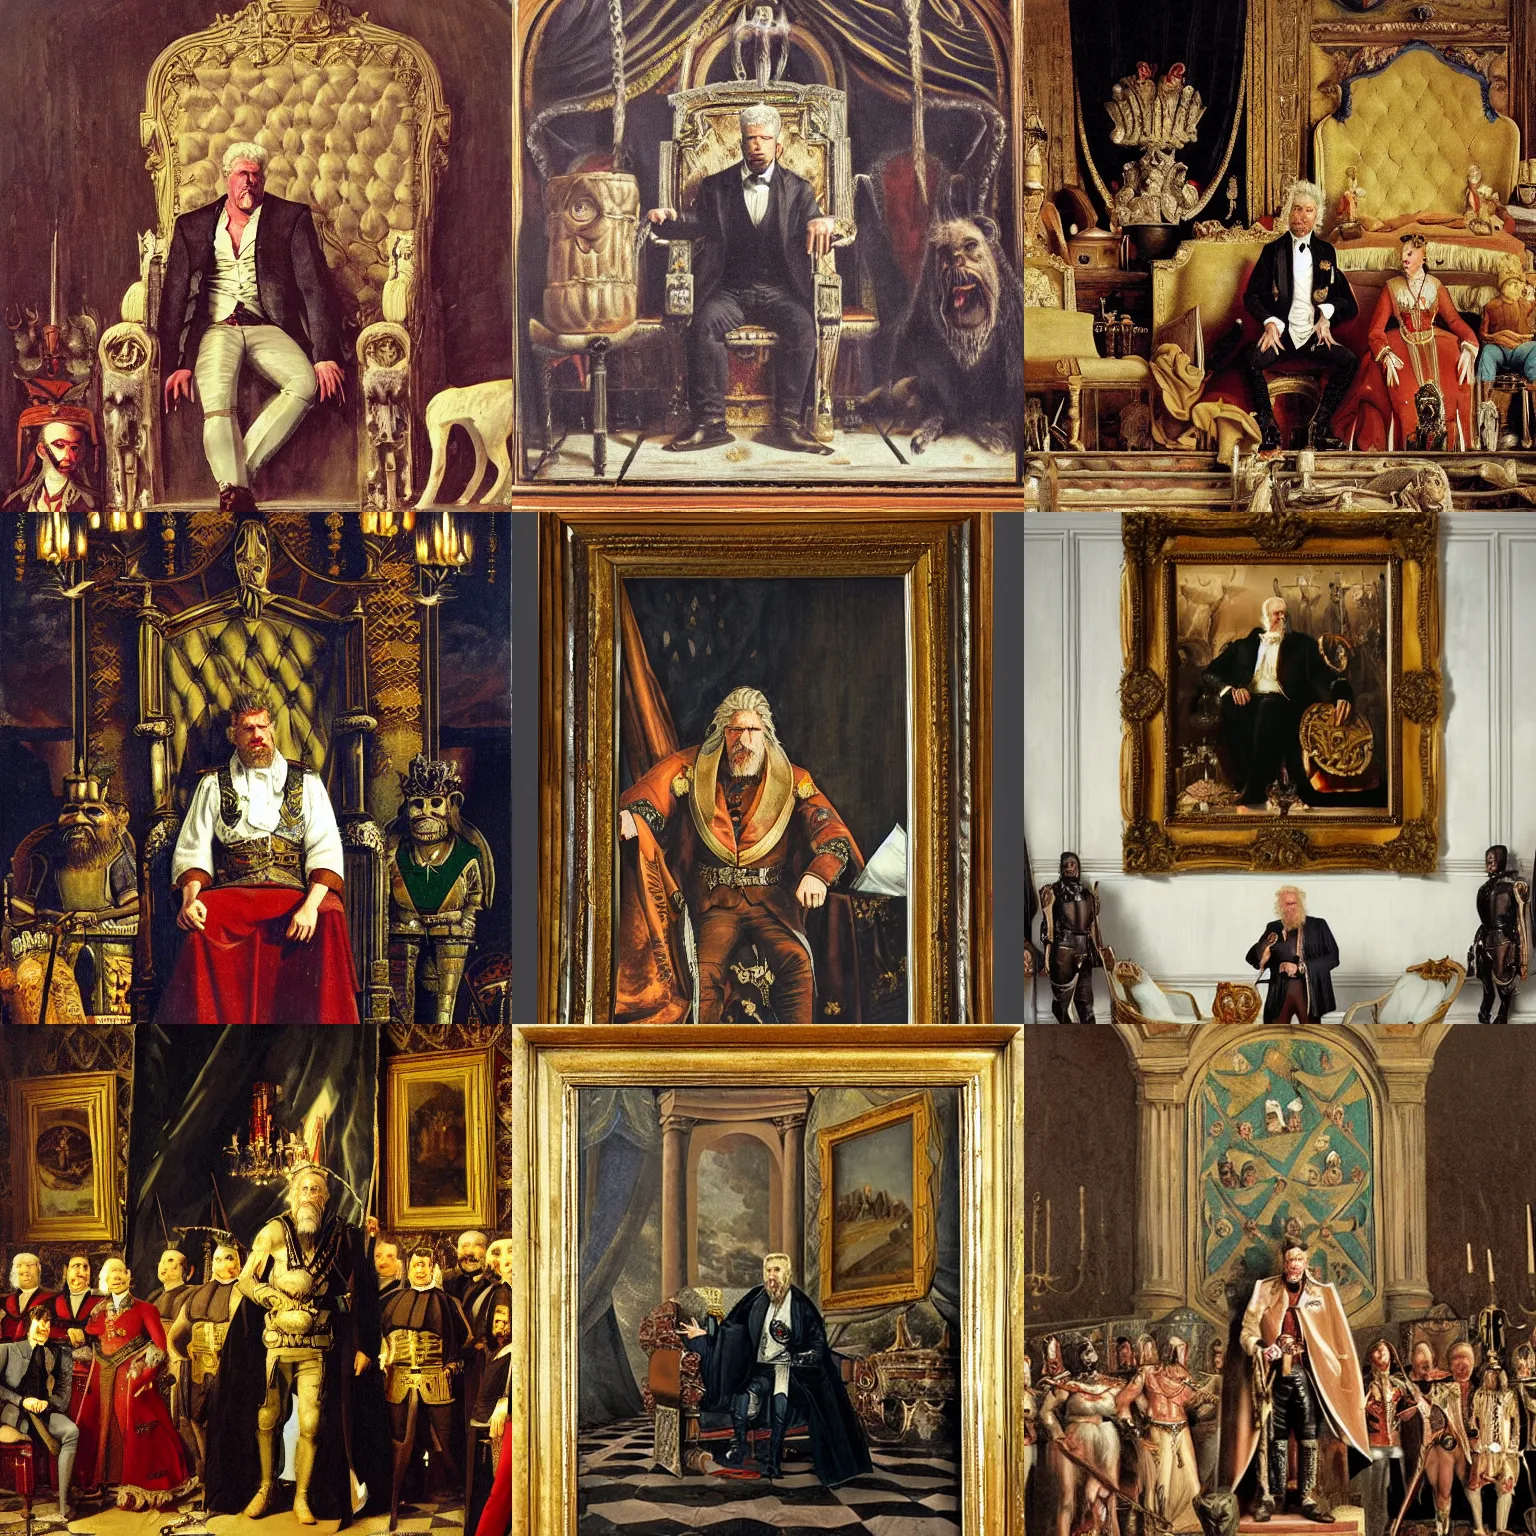 Prompt: Ron Perlman, king of Transylvania, in his stone throne hall, surrounded by courtiers, 19th century painting